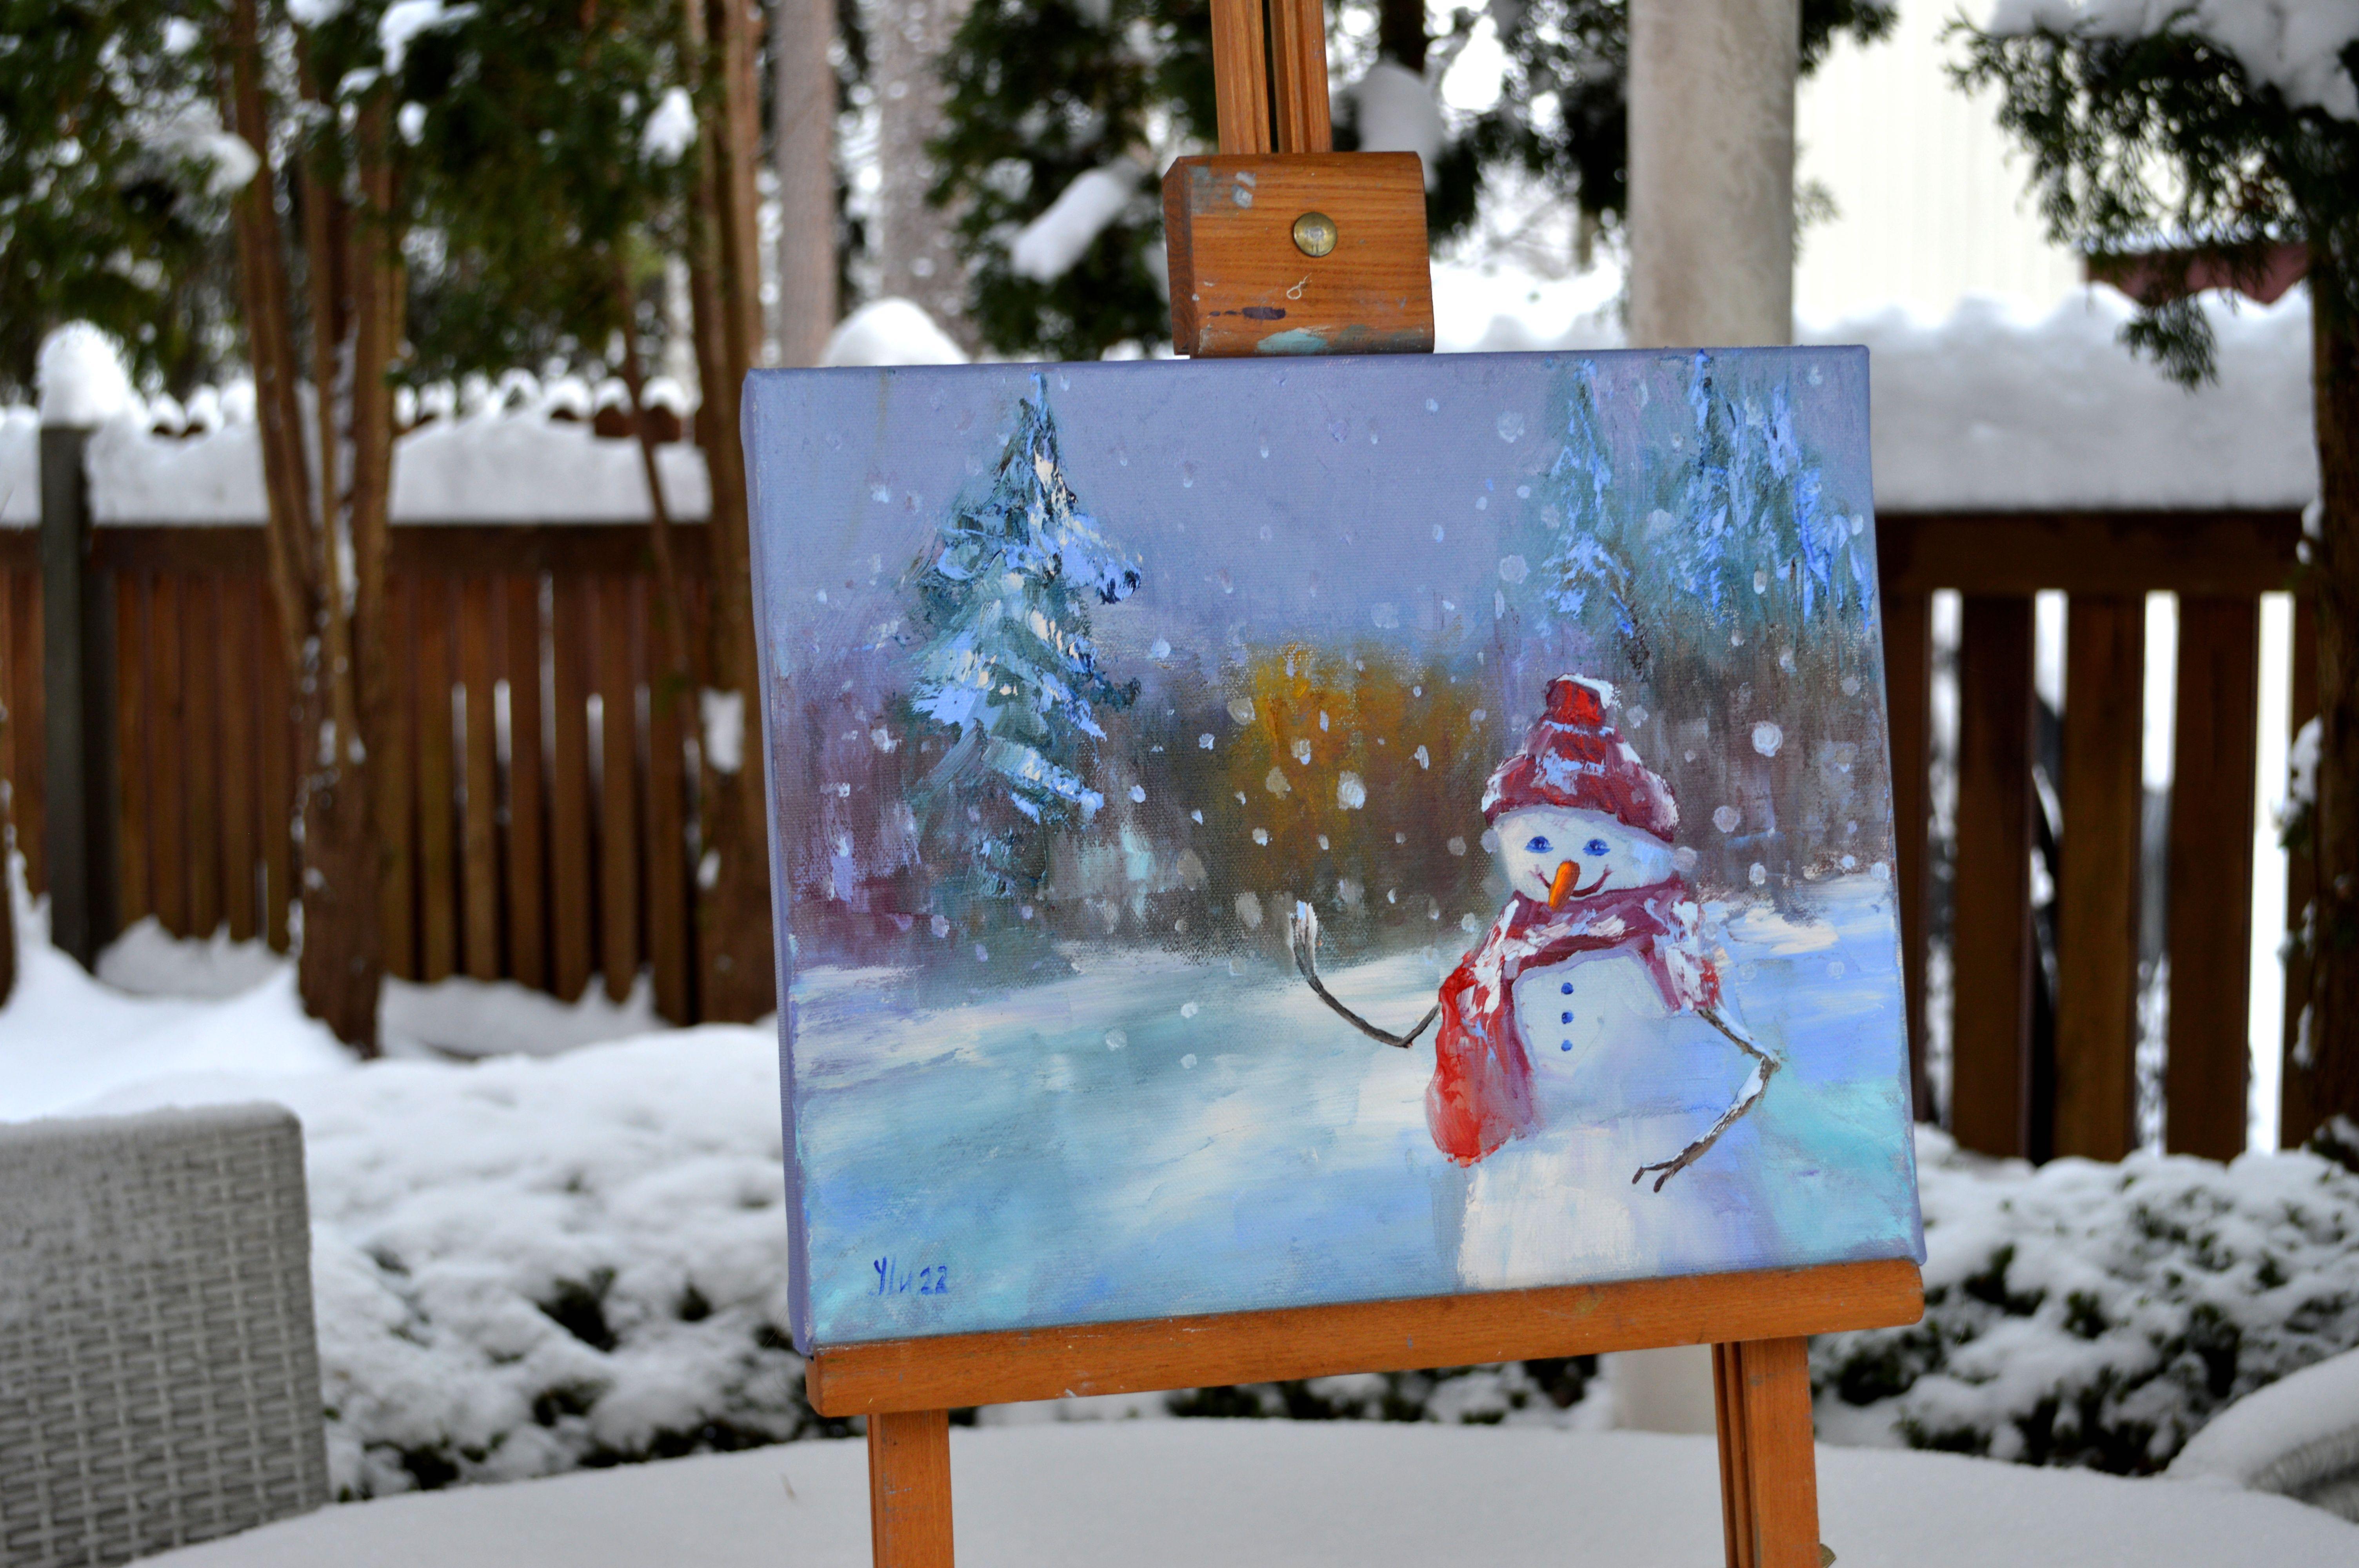 In this oil painting, I've captured a whimsical snowman, the embodiment of winter joy. The expressive strokes and vibrant palette evoke the crisp, enlivening air of a snowy forest. This charming figure, adorned with a jovial hat and scarf, reaches